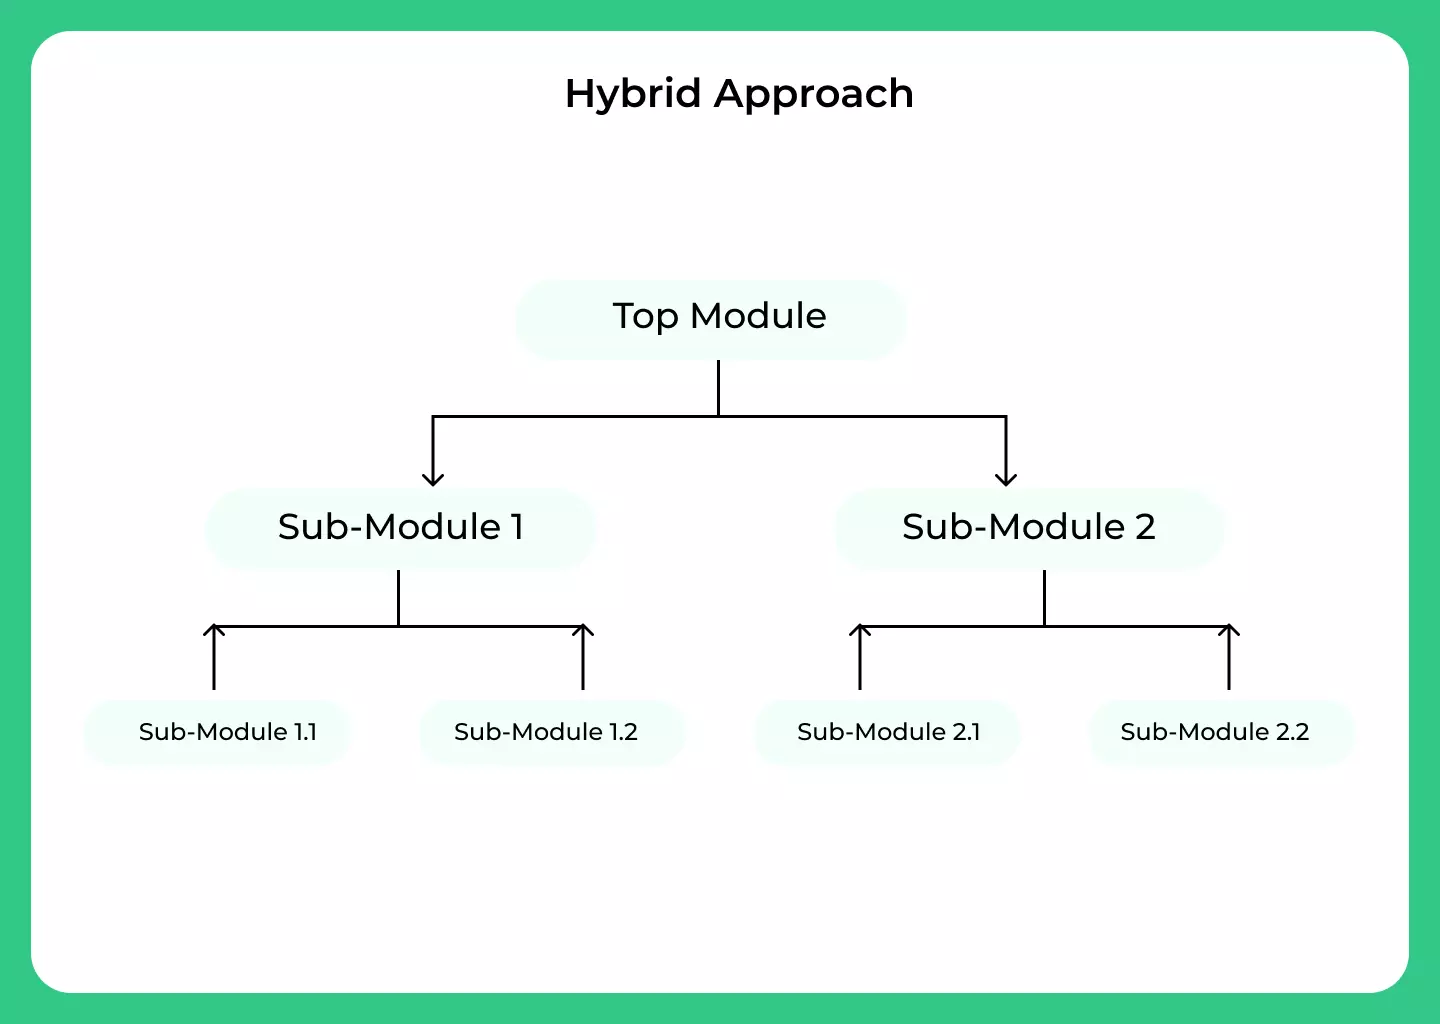 Hybrid Approach for Software Testing